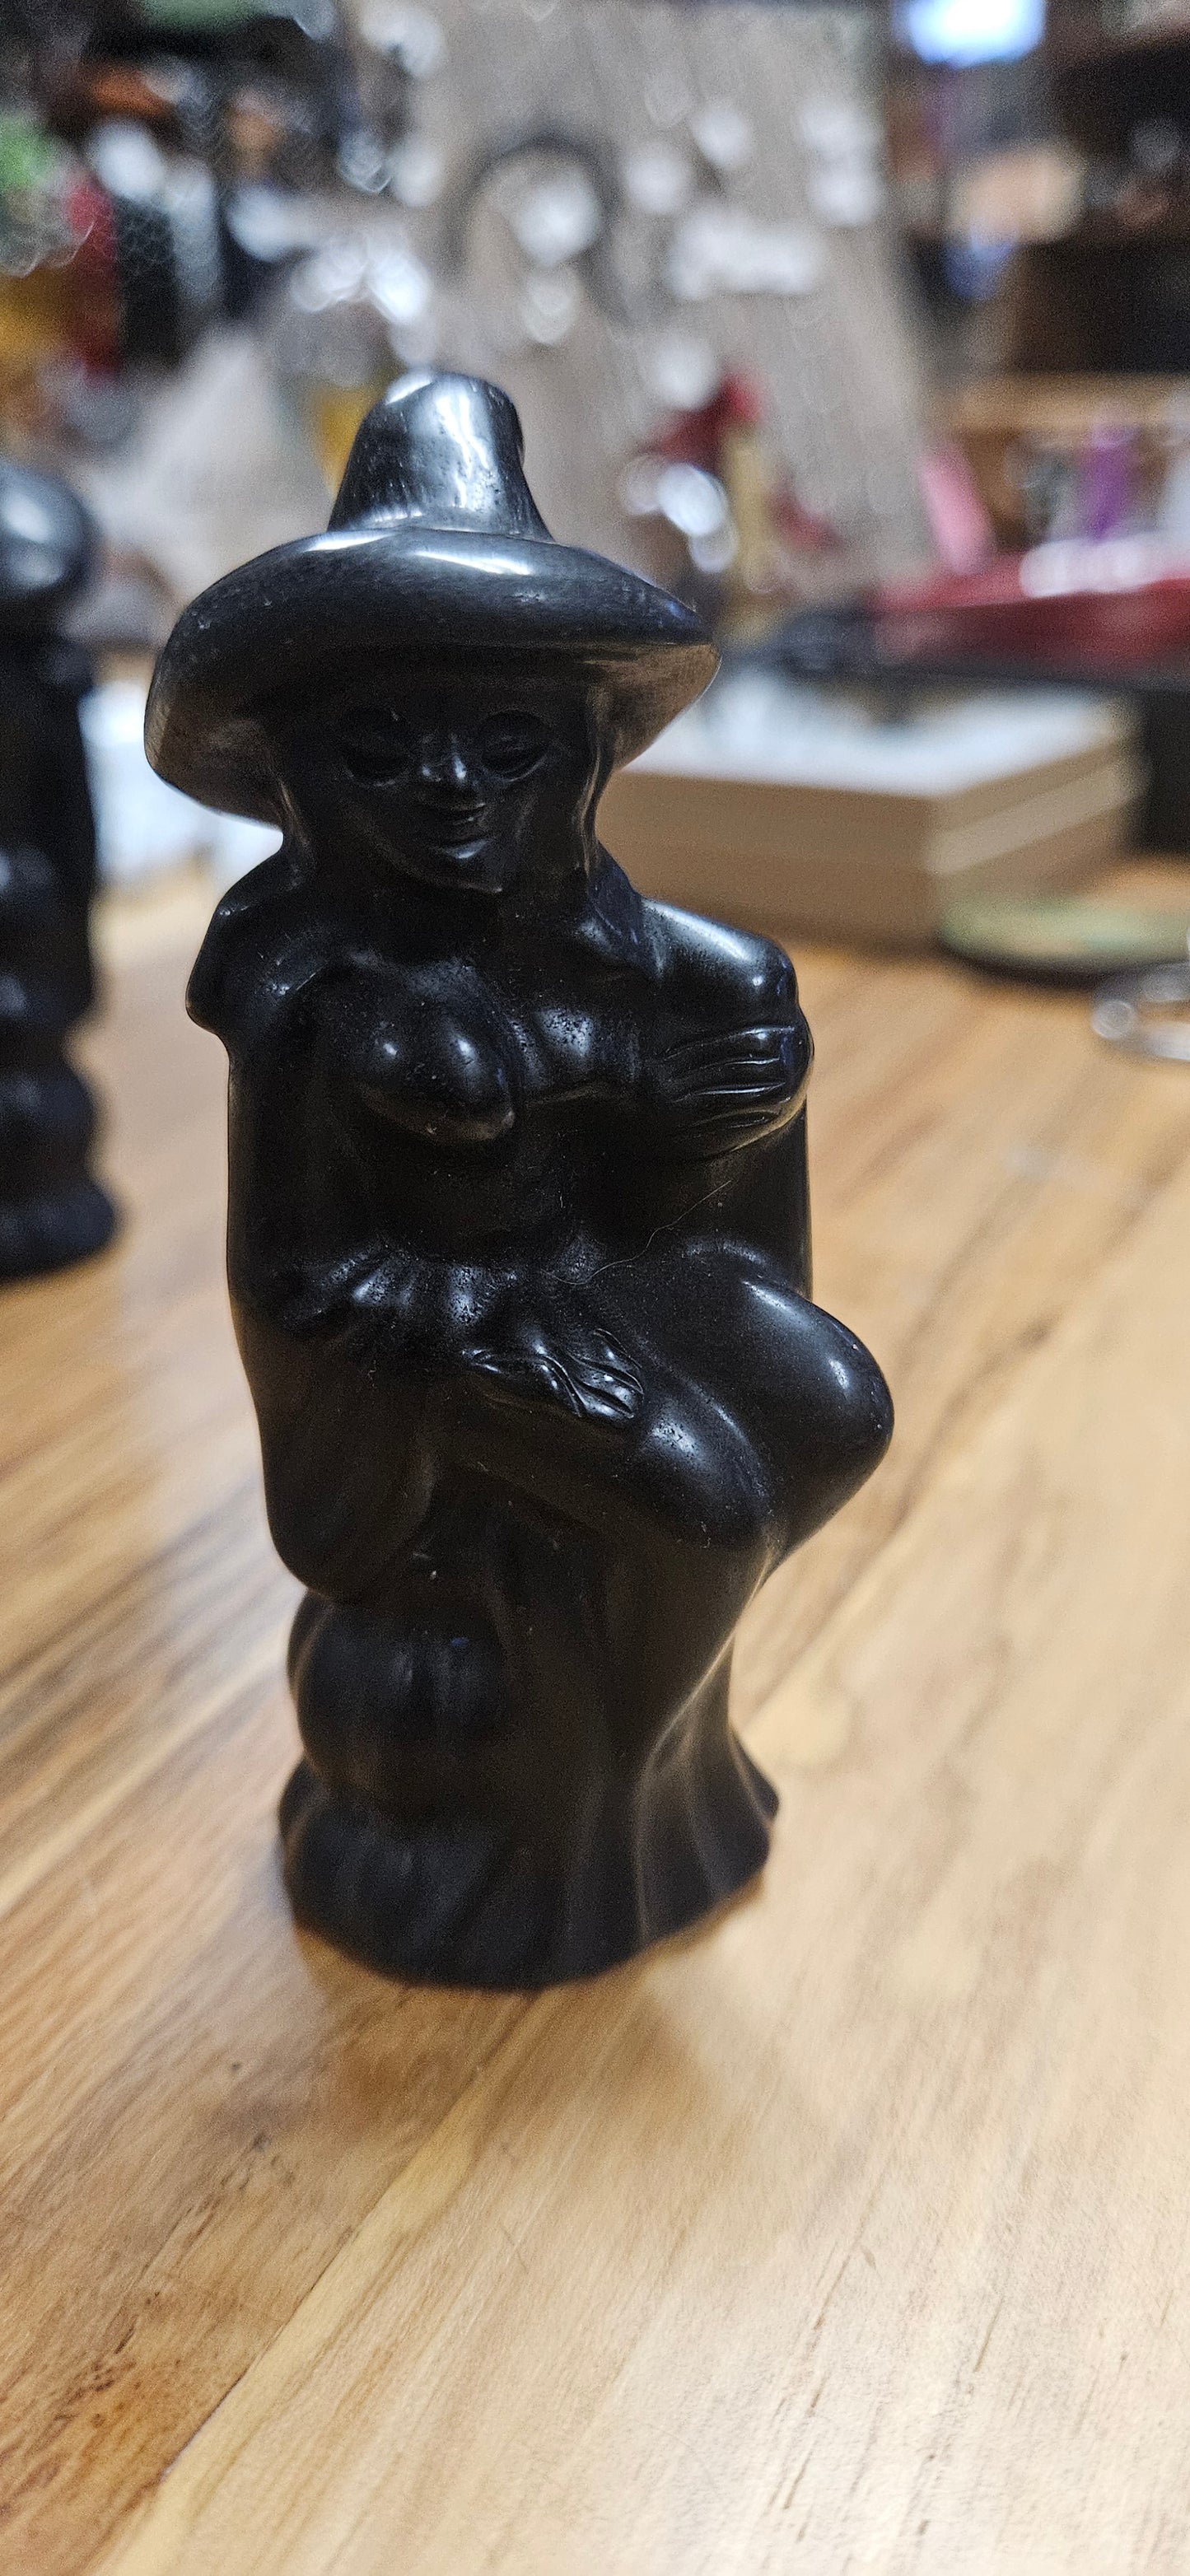 Obsidian Carved Witch on Broom  3 1/2"